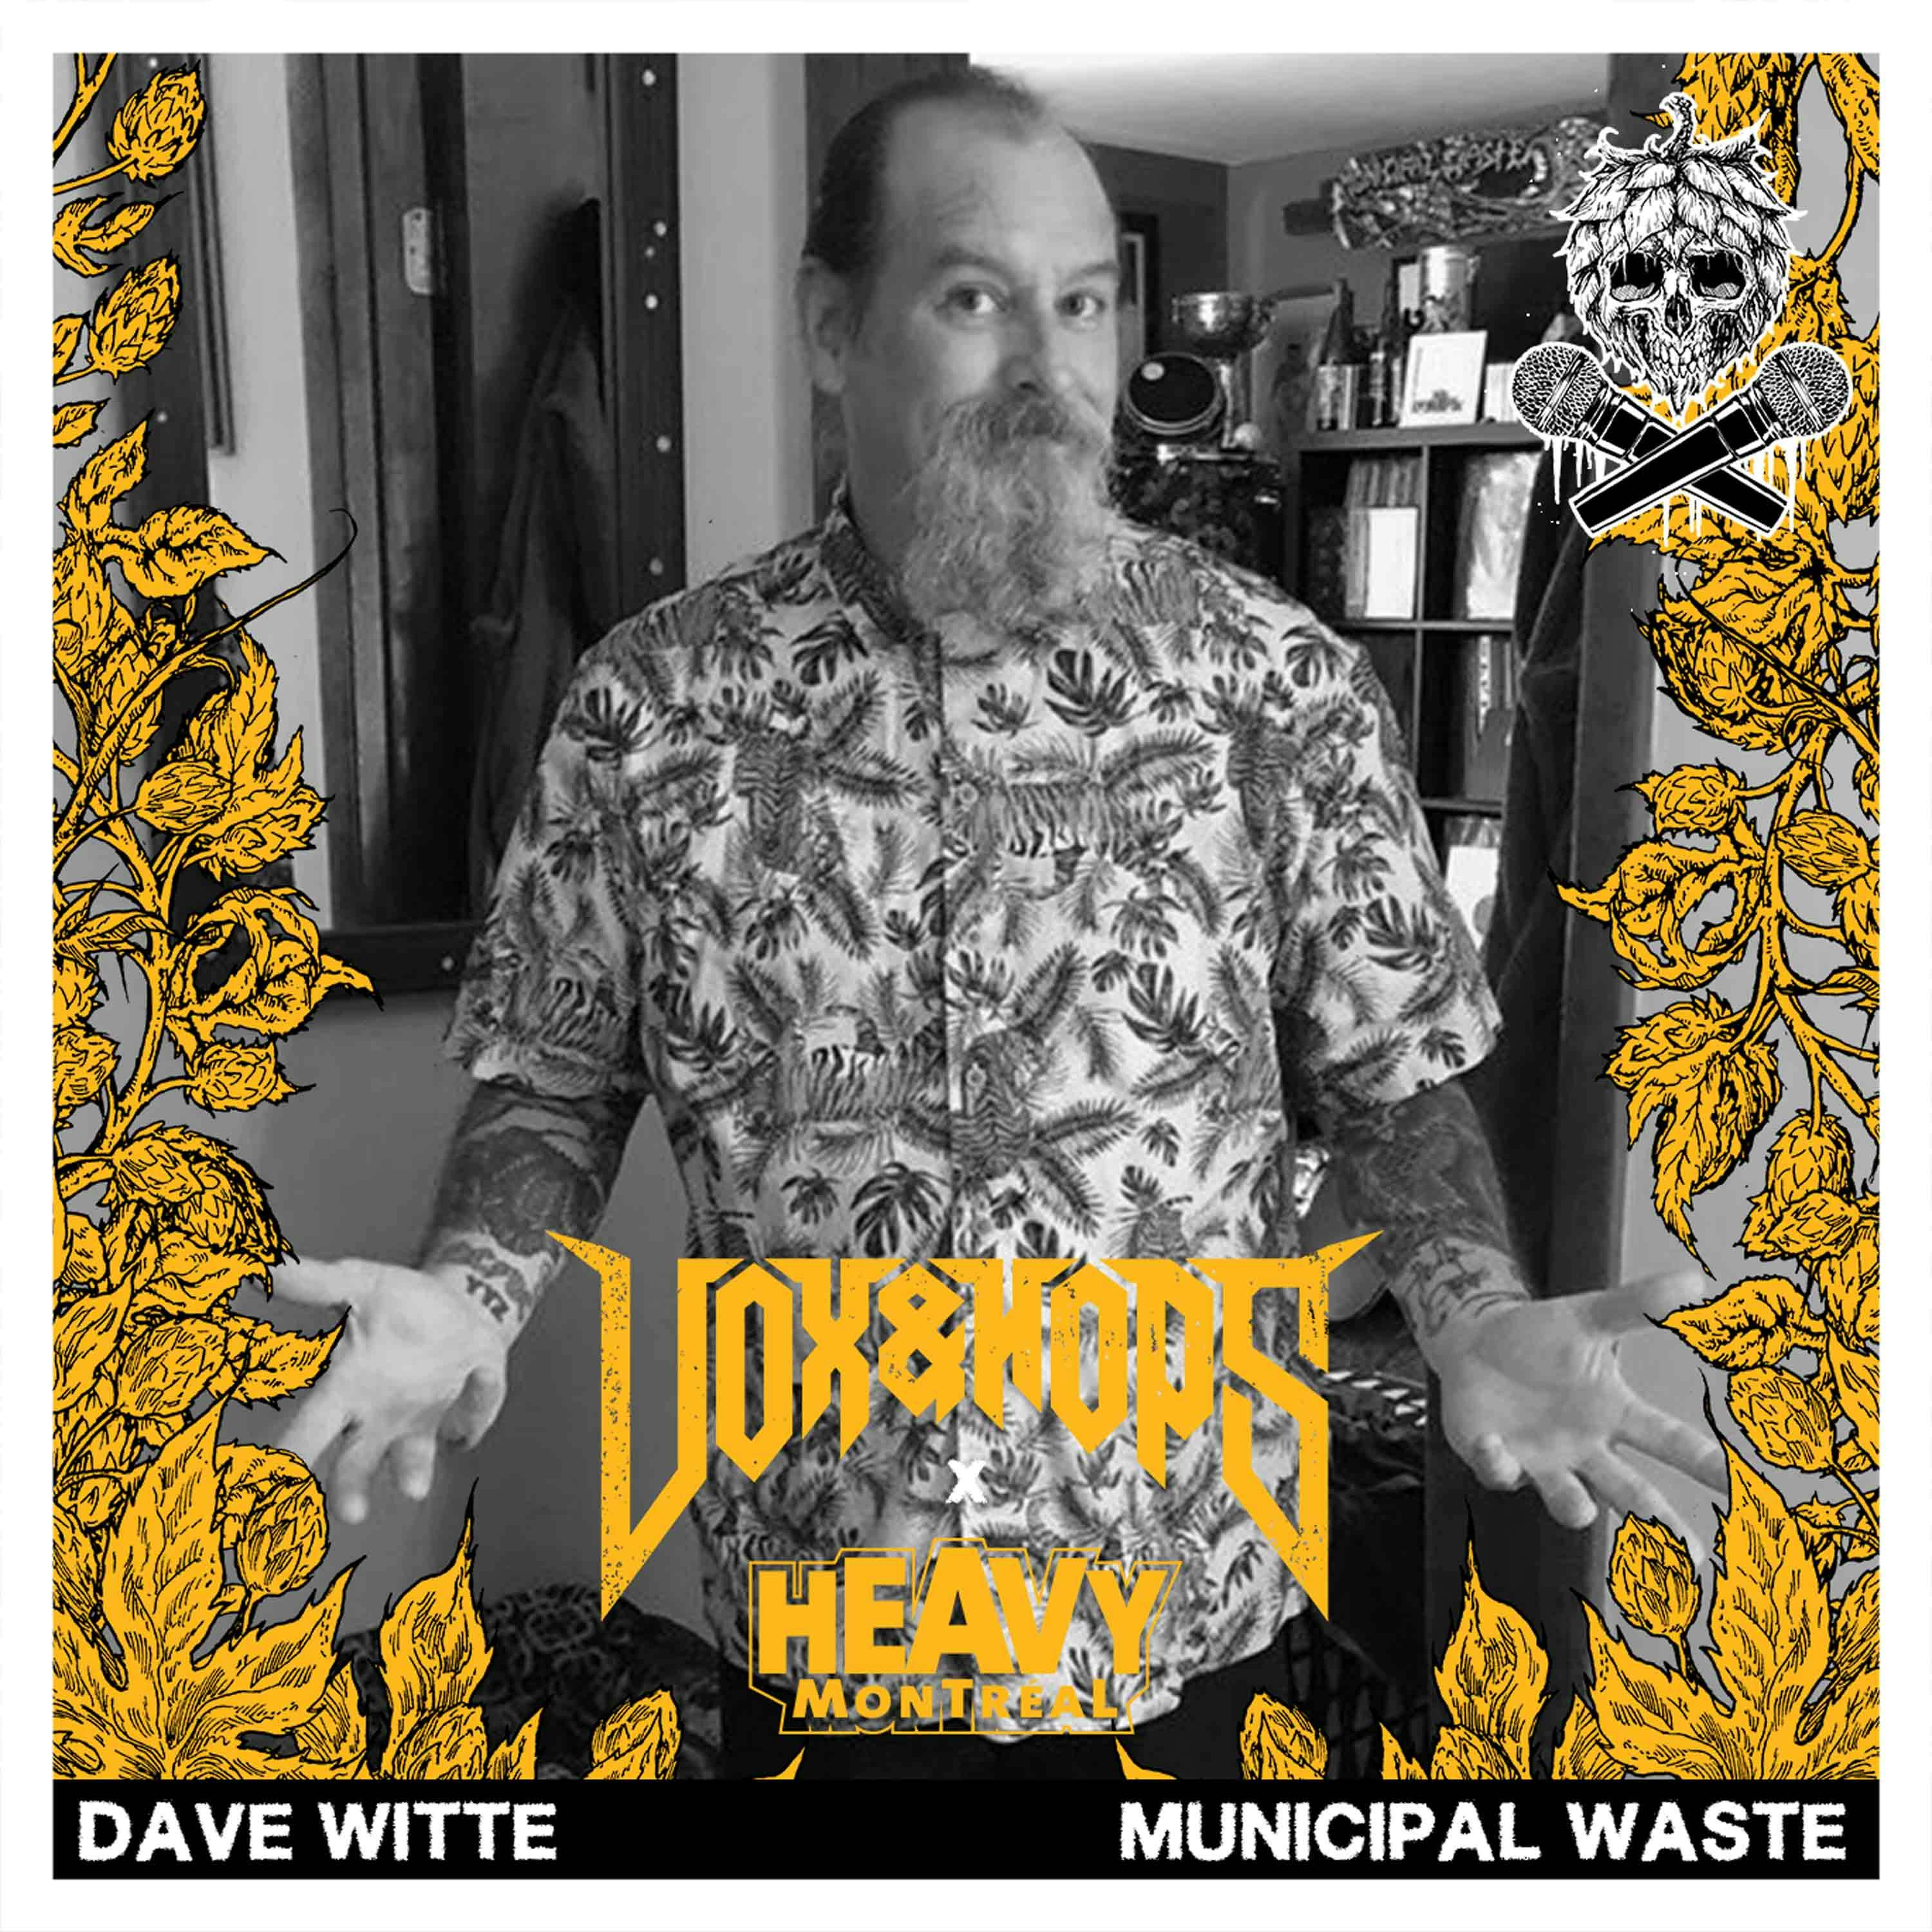 Metal & Craft Beer with Dave Witte of Municipal Waste Image